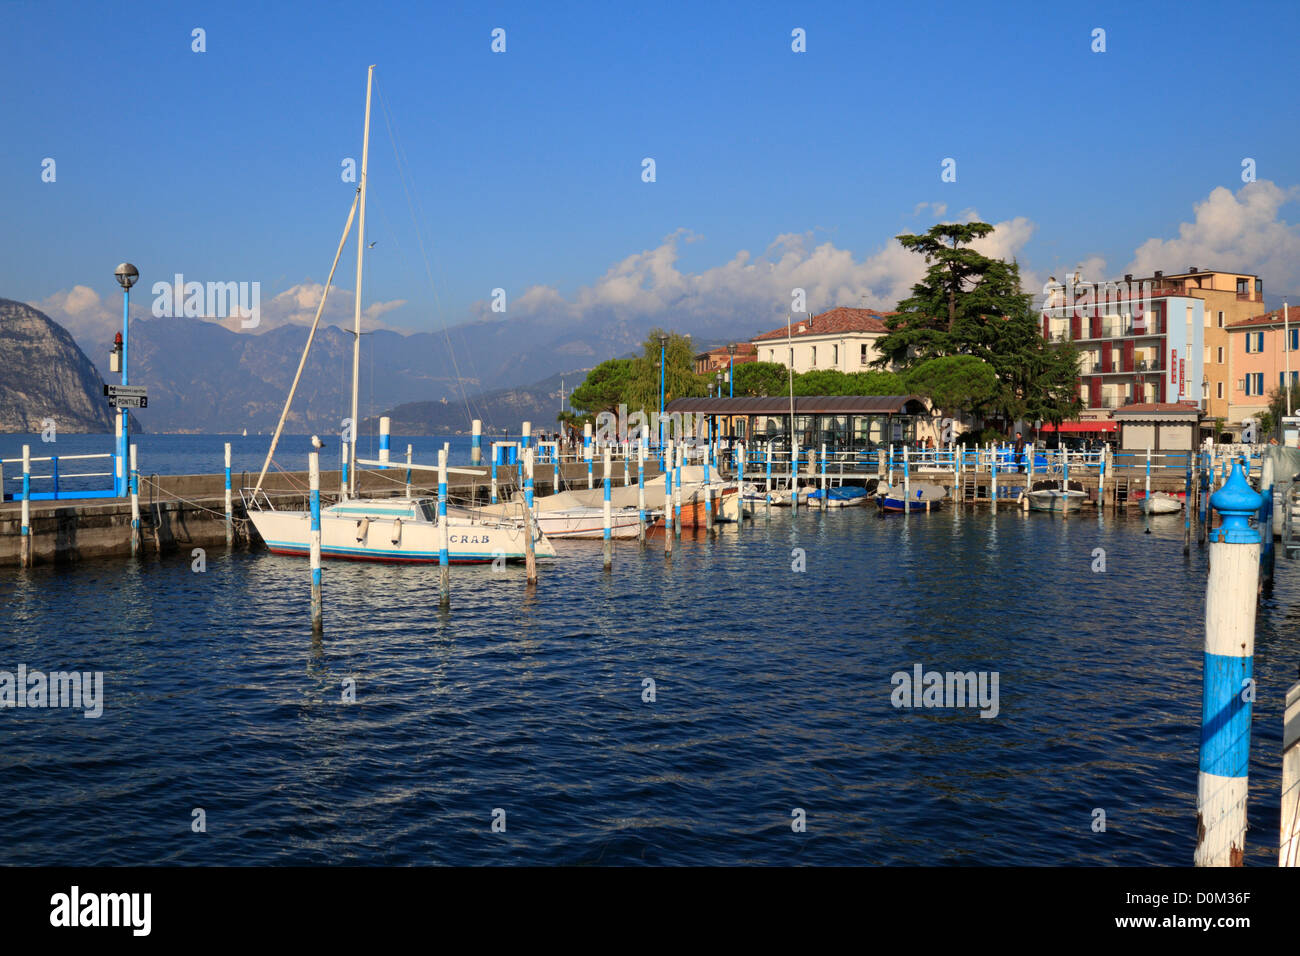 Boats in the harbour on Lake Iseo near Bergamo, Lombardy, Italy, Europe. Stock Photo